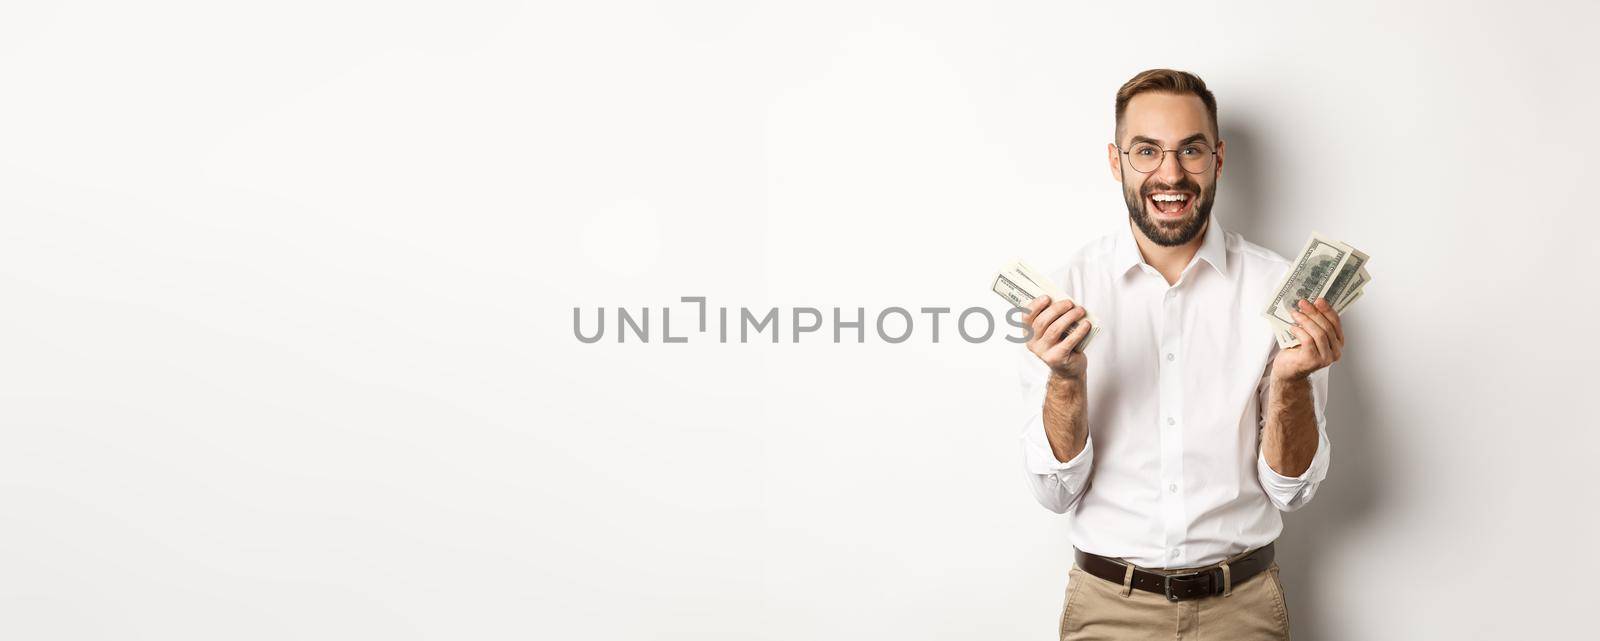 Handsome successful business man counting money, rejoicing and smiling, standing over white background.